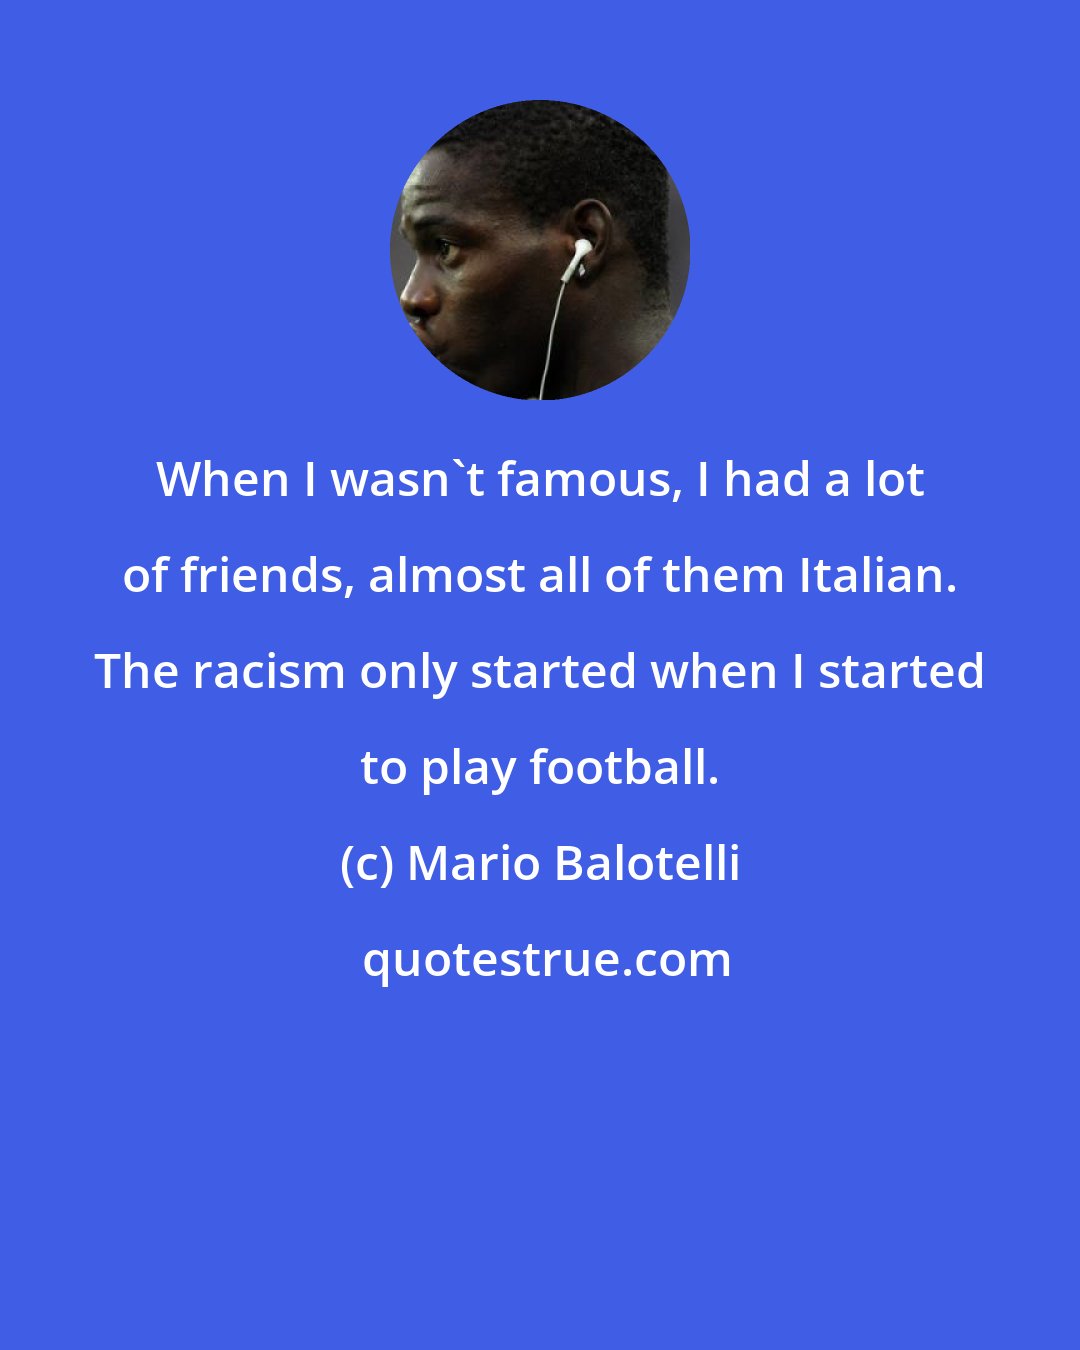 Mario Balotelli: When I wasn't famous, I had a lot of friends, almost all of them Italian. The racism only started when I started to play football.